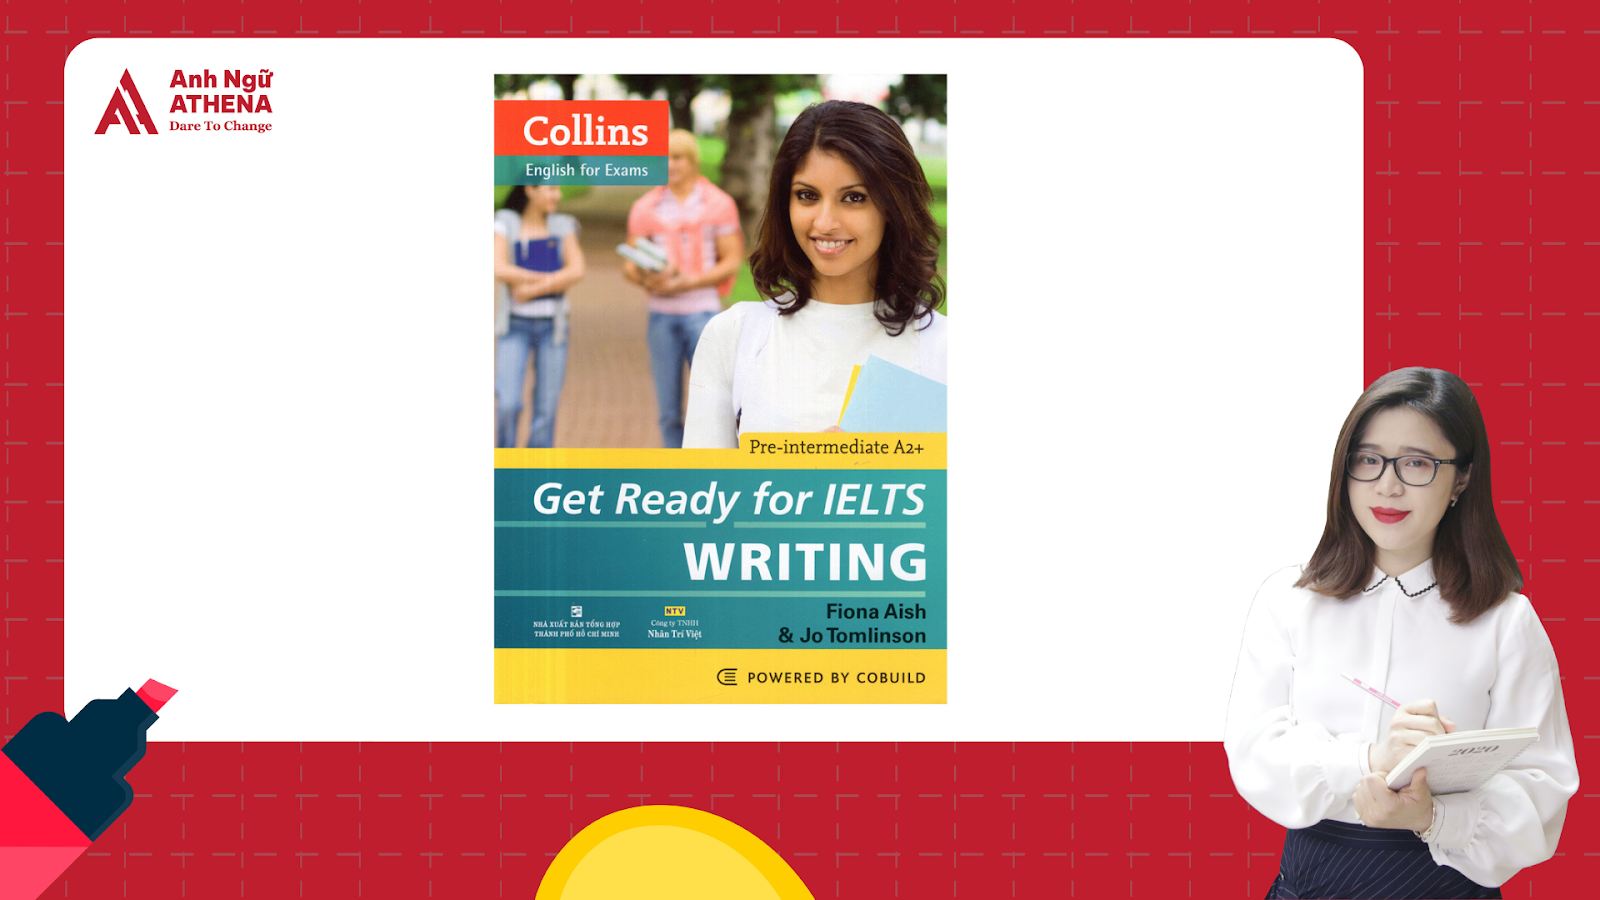 Sách IELTS Writing “Get Ready For IELTS Writing”